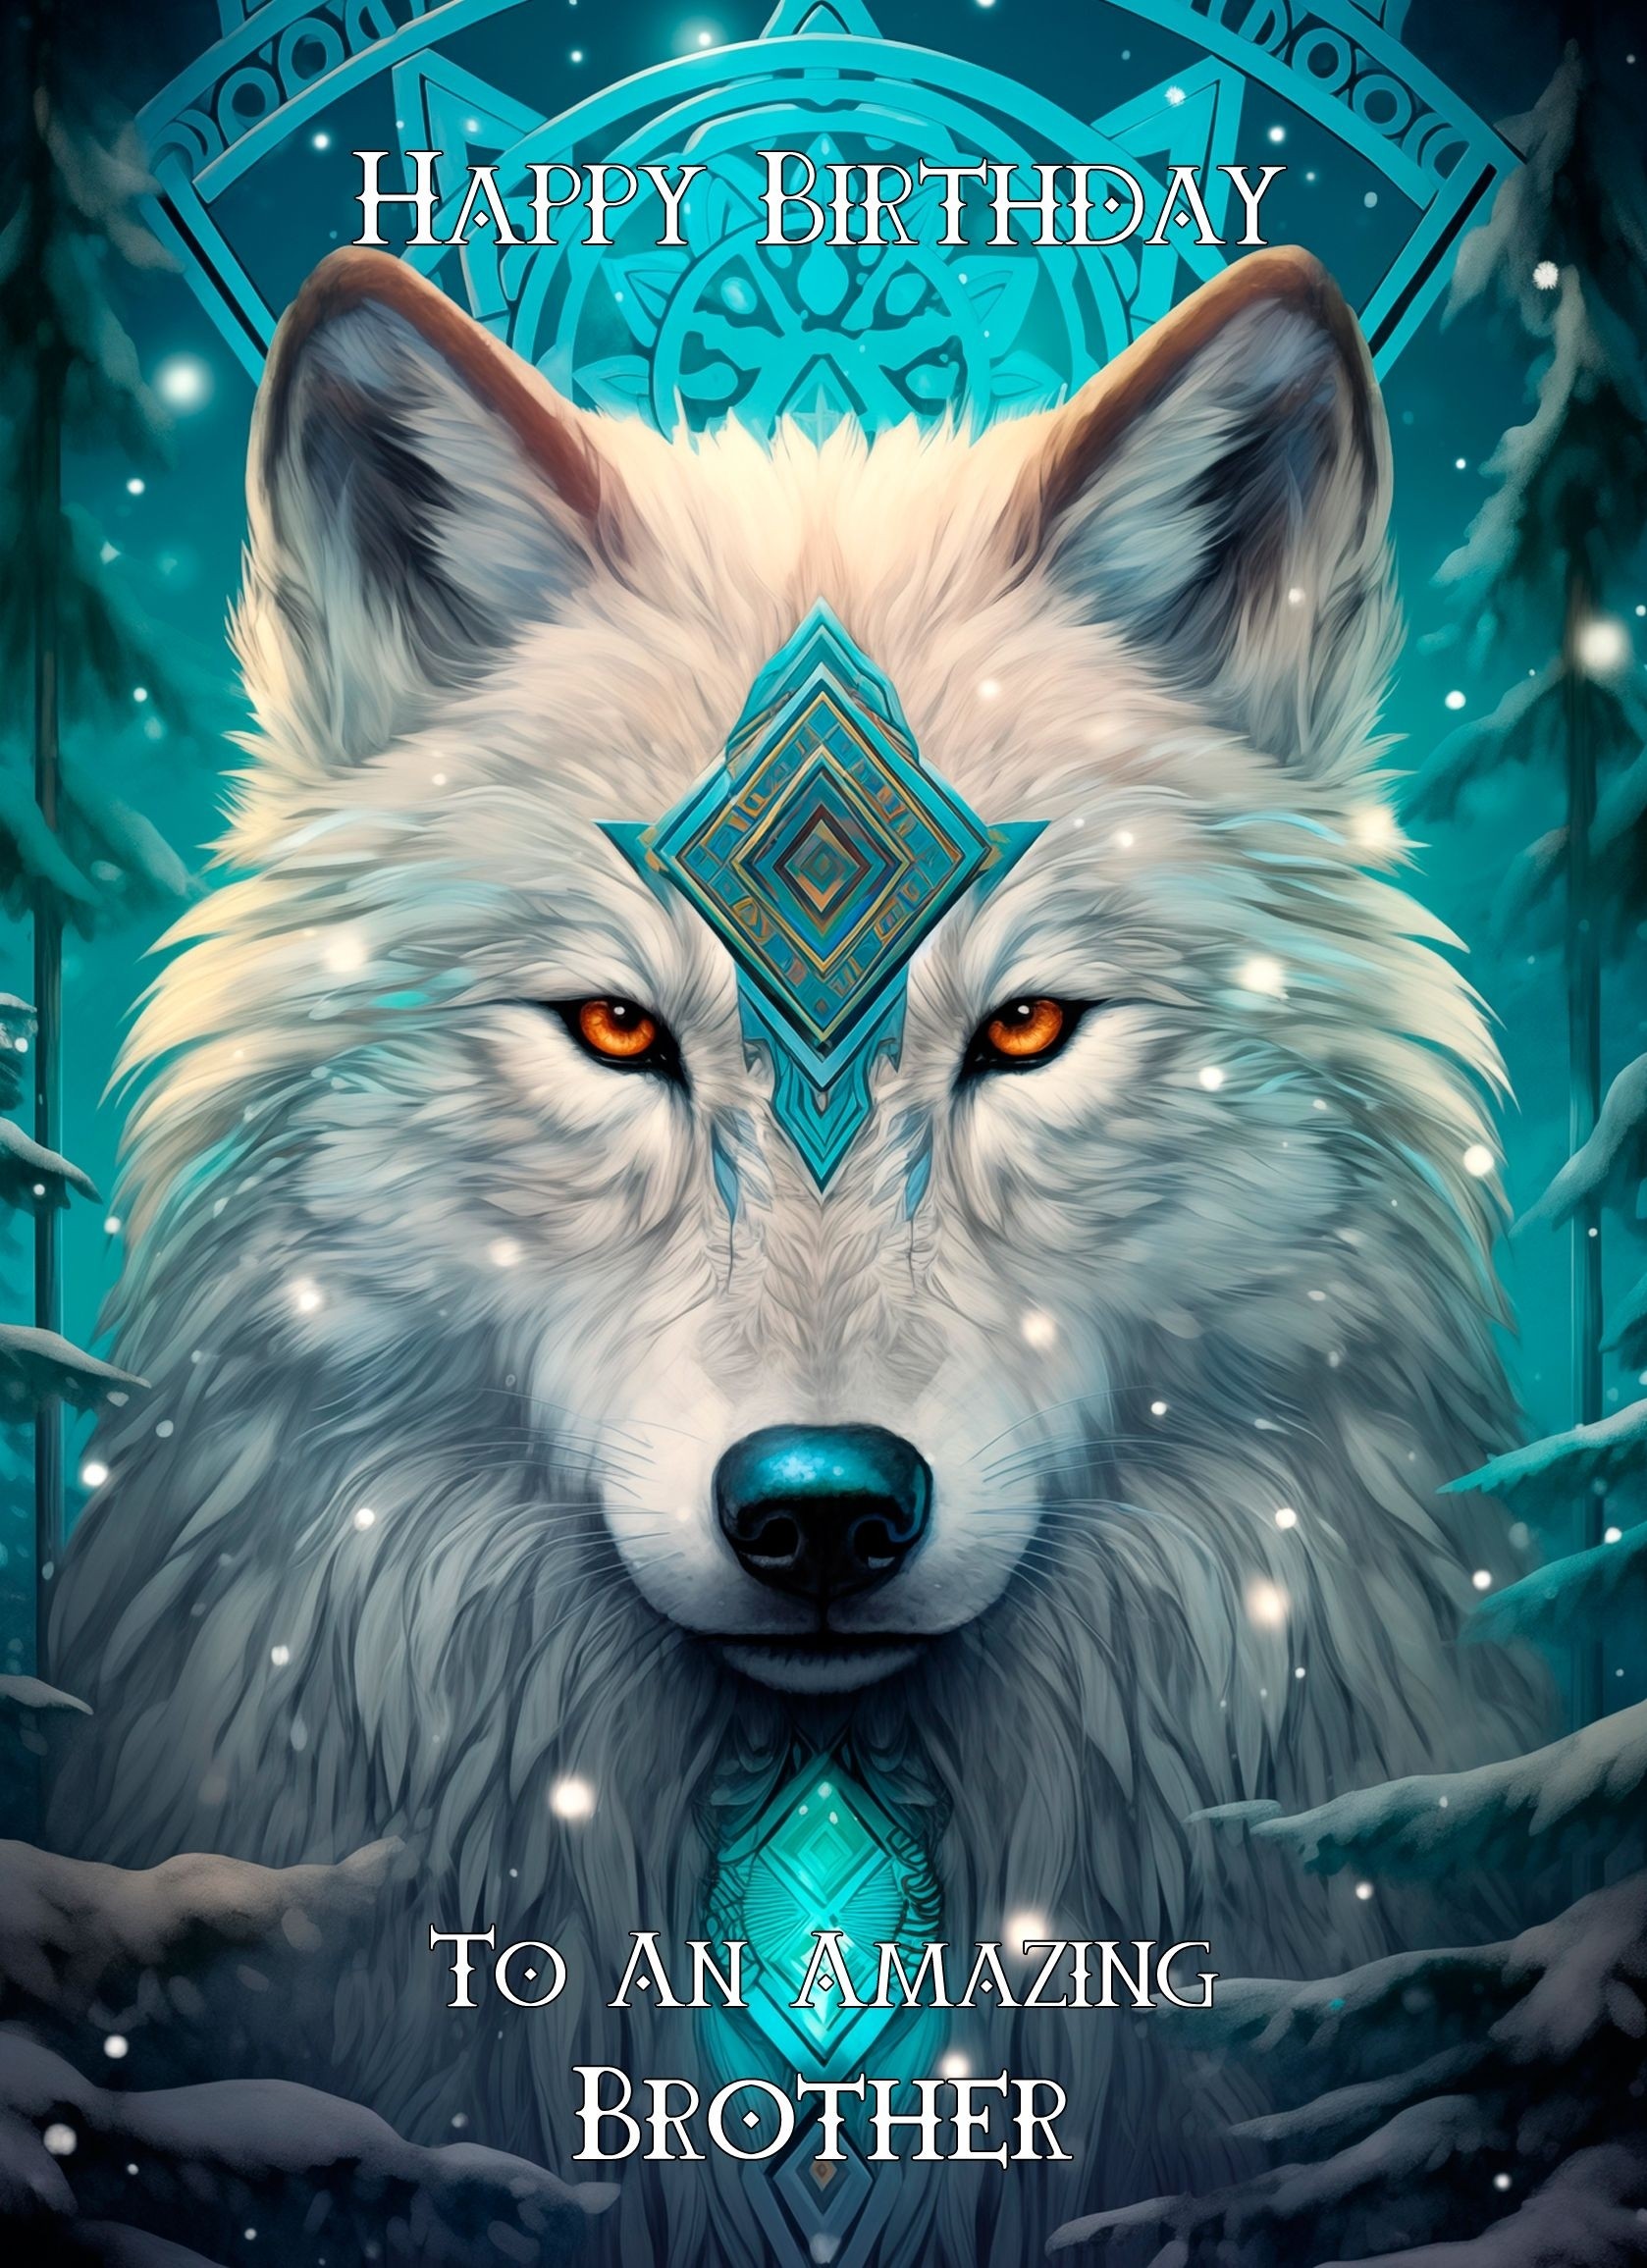 Tribal Wolf Art Birthday Card For Brother (Design 3)